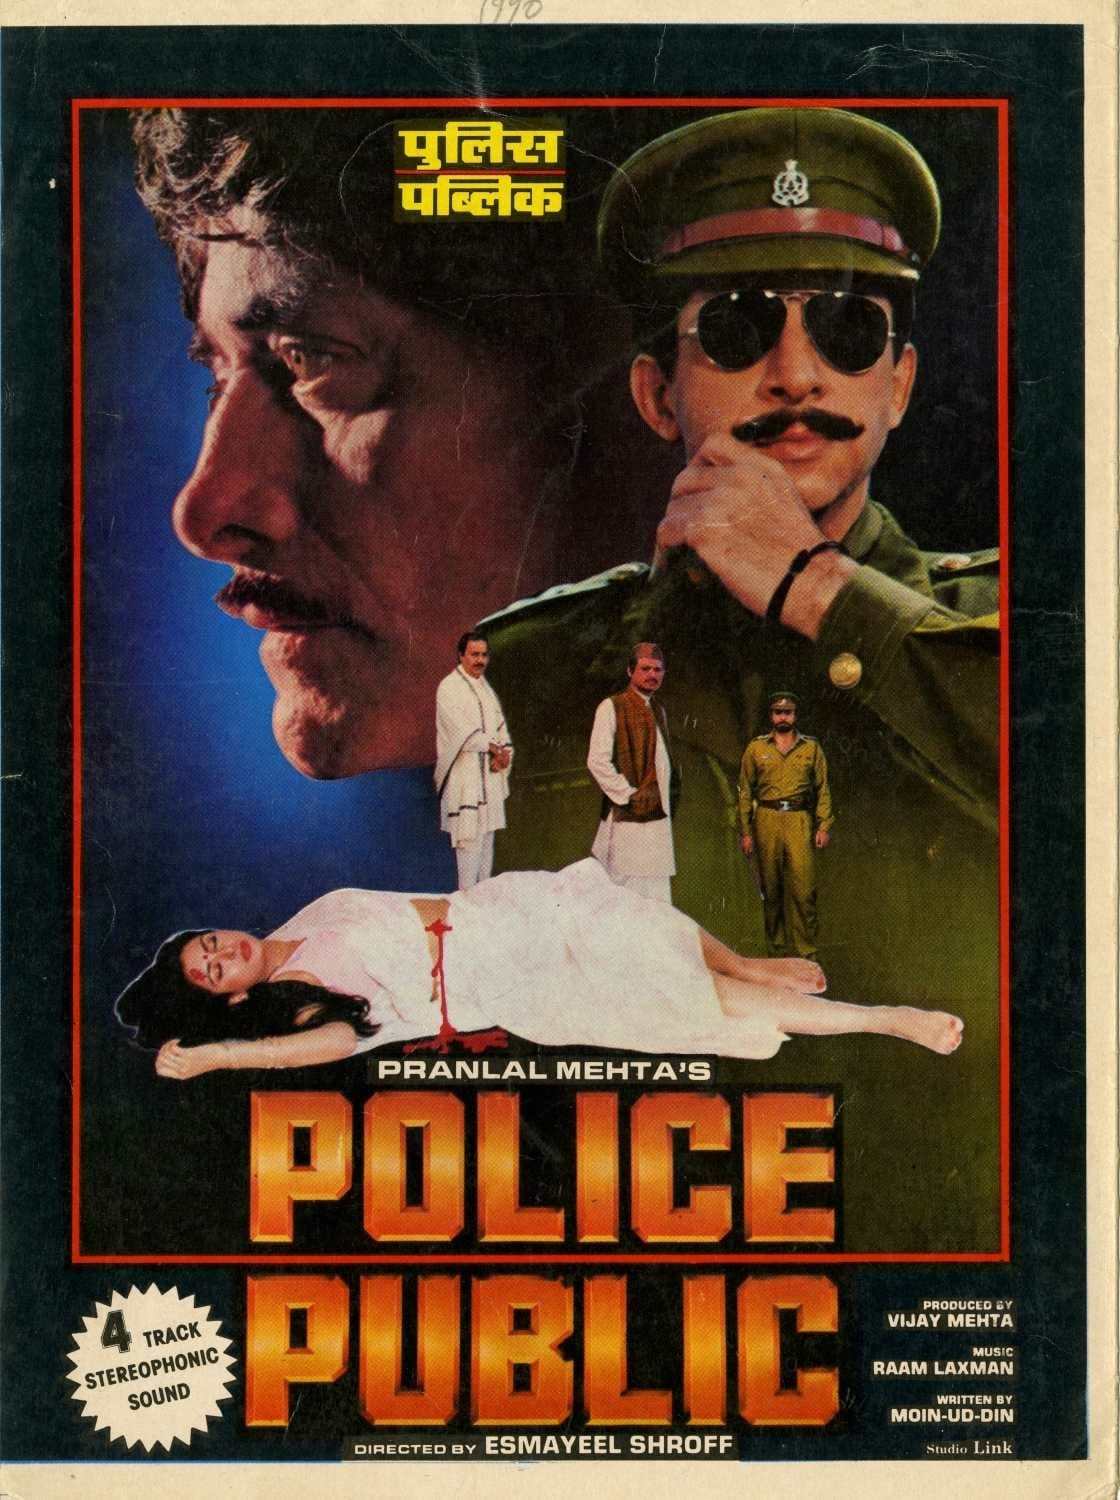 Poster for the movie "Police Public"